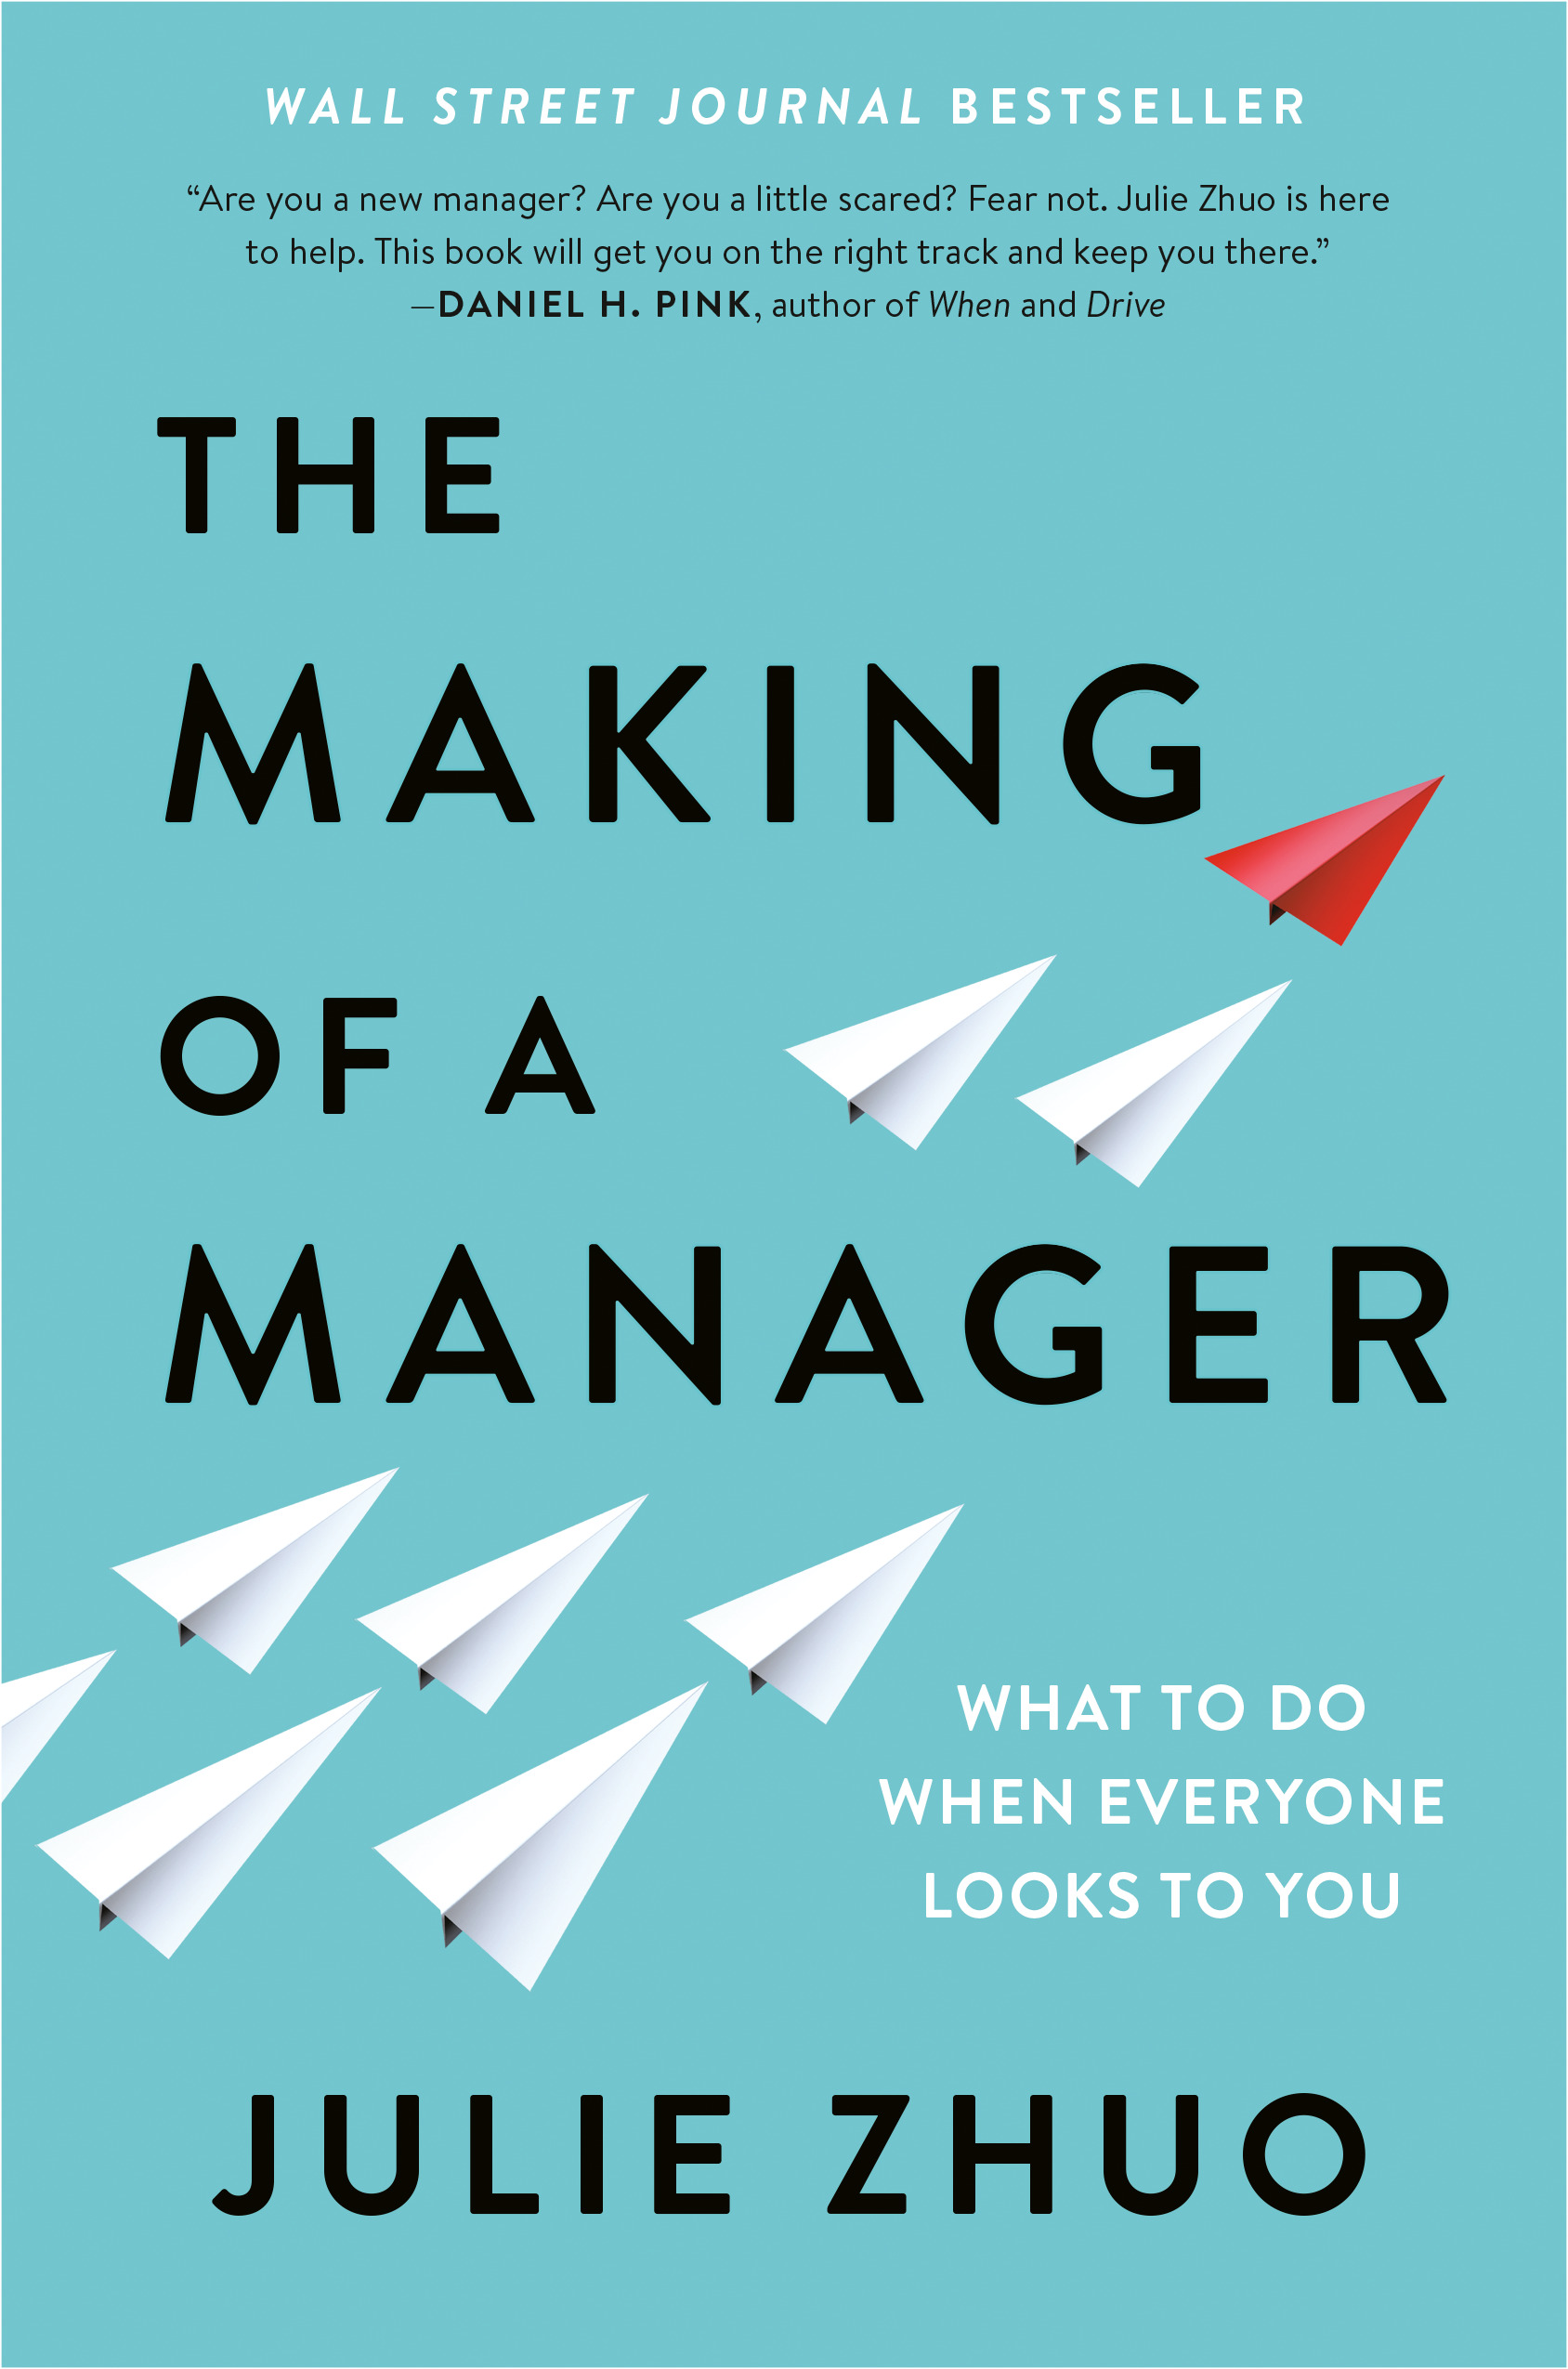 The Making of a Manager : What to Do When Everyone Looks to You | Business & Management